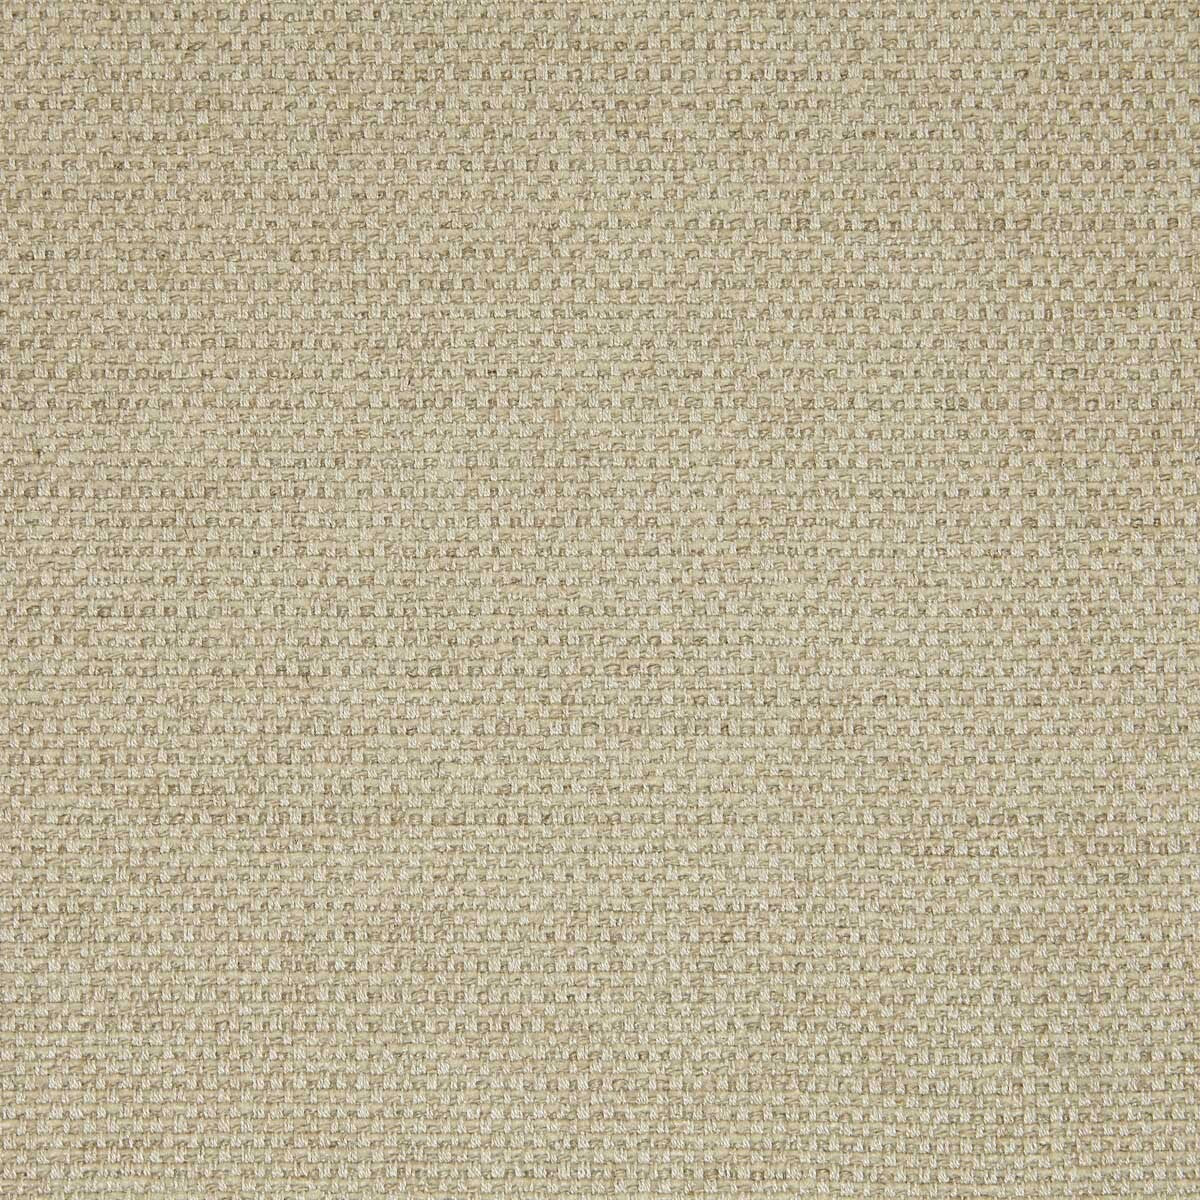 Godai fabric in 6 color - pattern LZ-30349.06.0 - by Kravet Design in the Lizzo collection